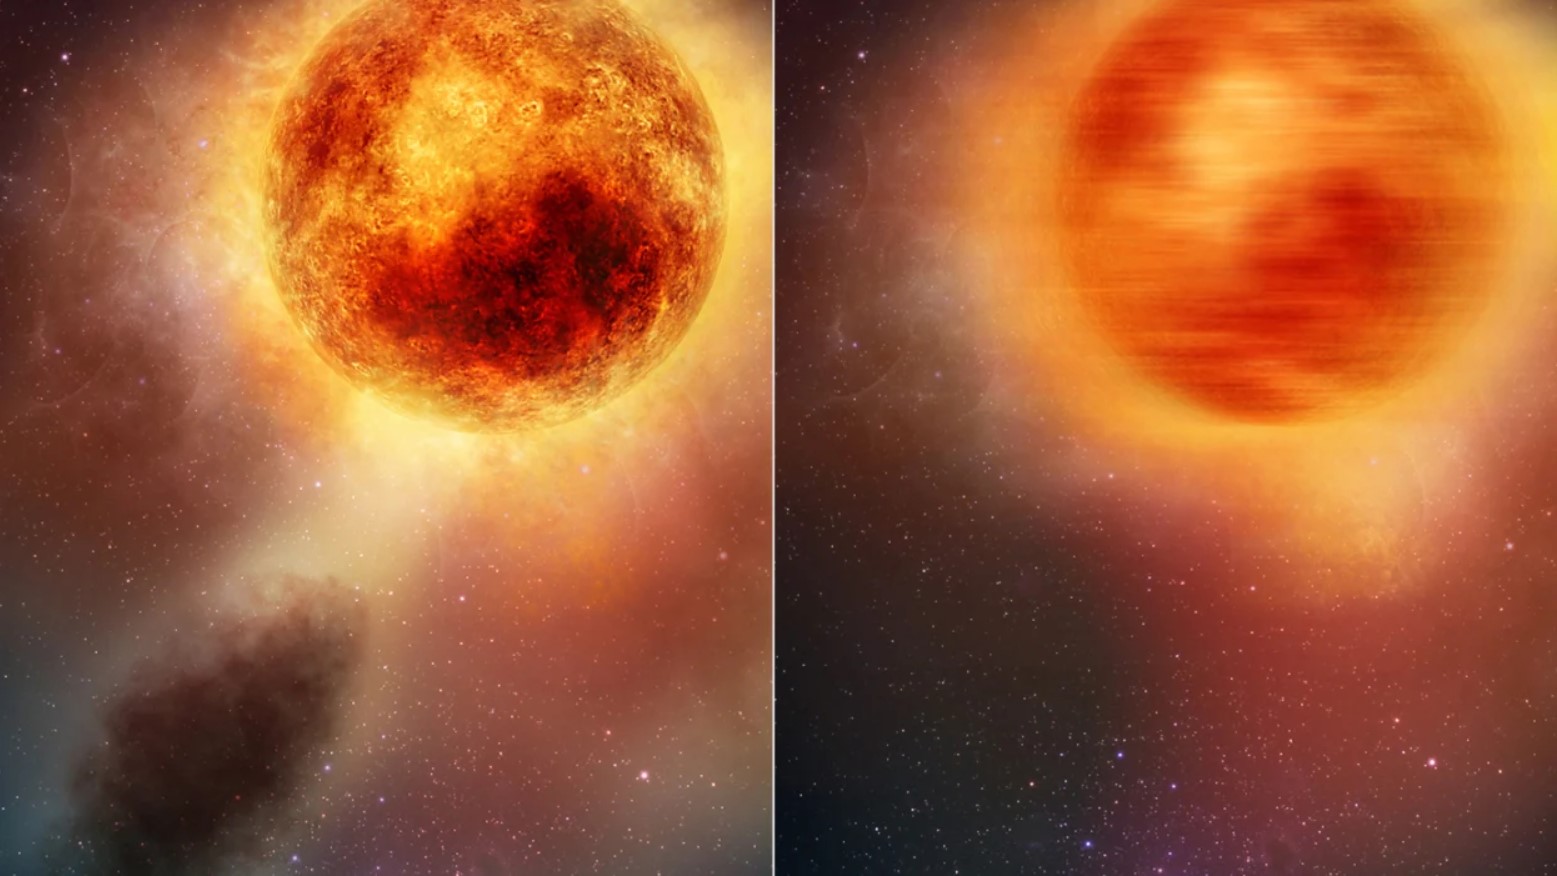 What's making this red supergiant's millennium?